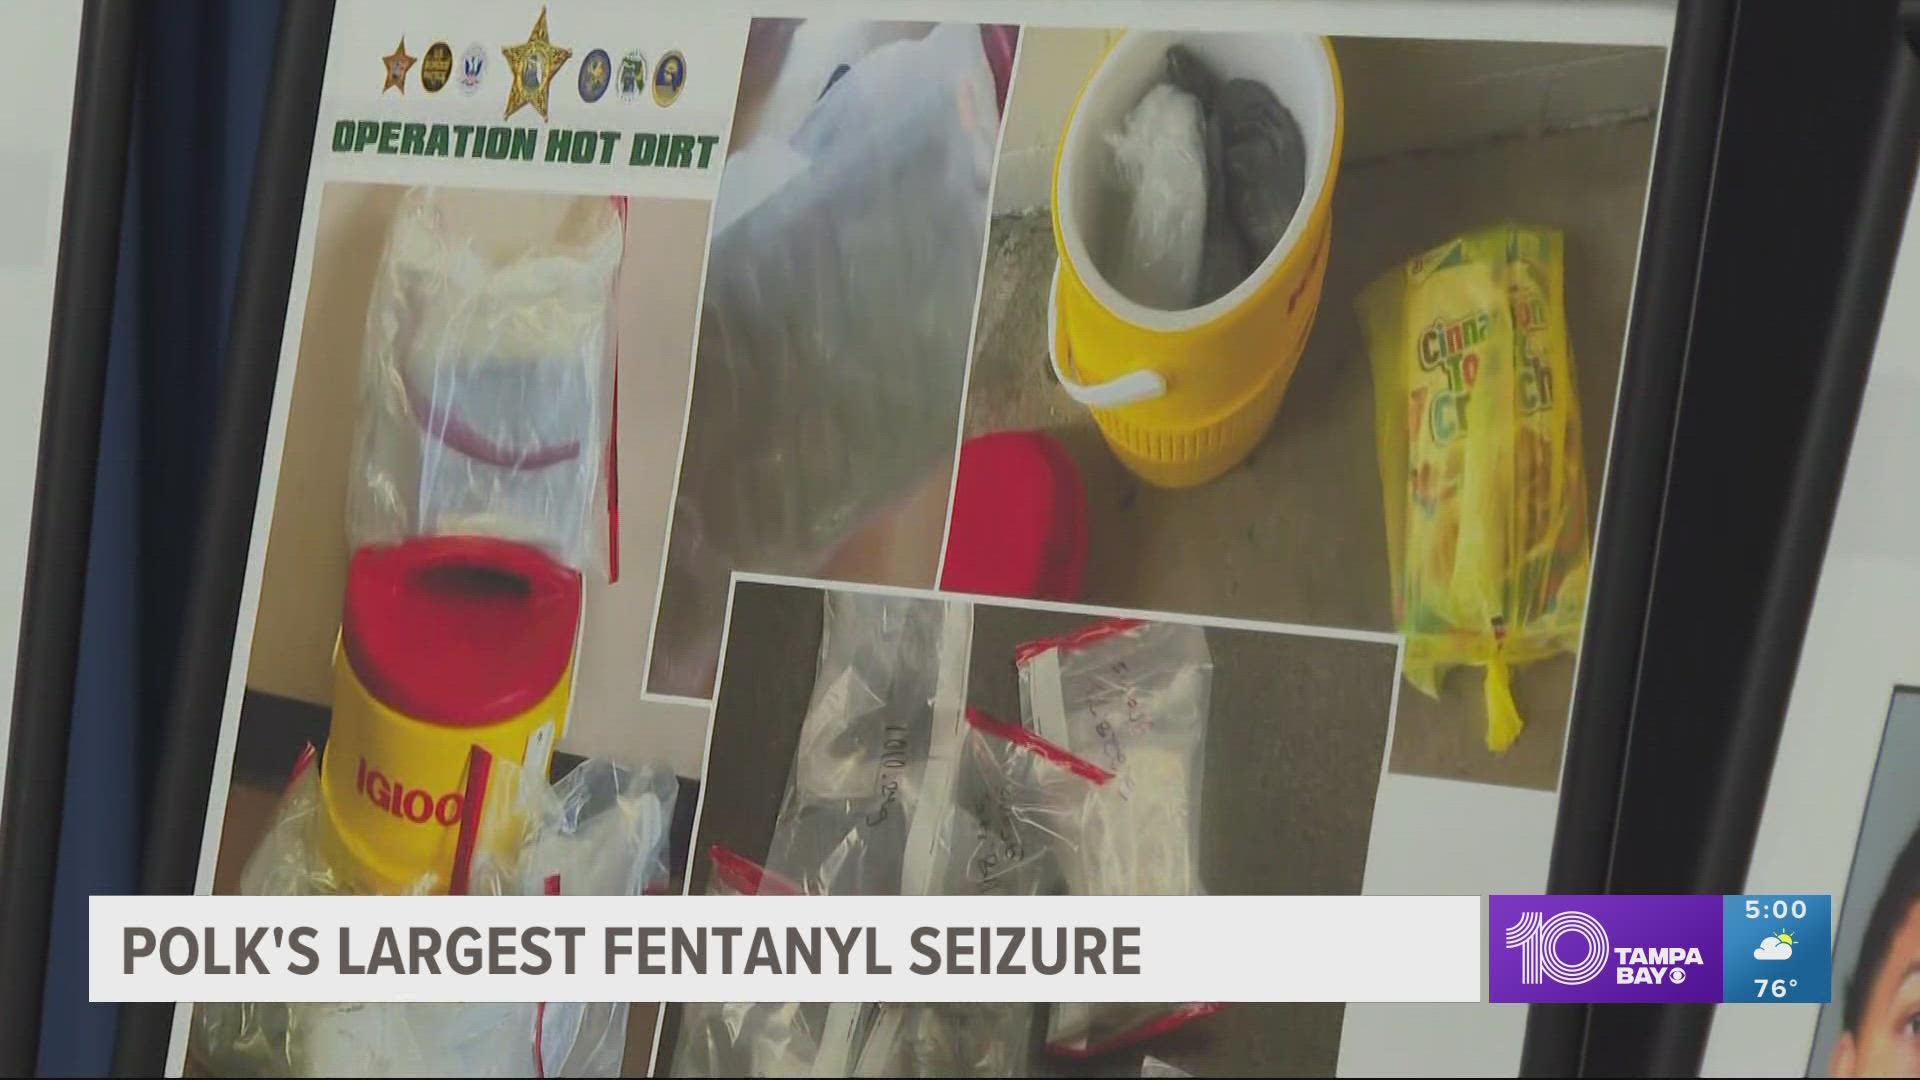 The sheriff's office arrested three people accused of trafficking fentanyl from Mexico.